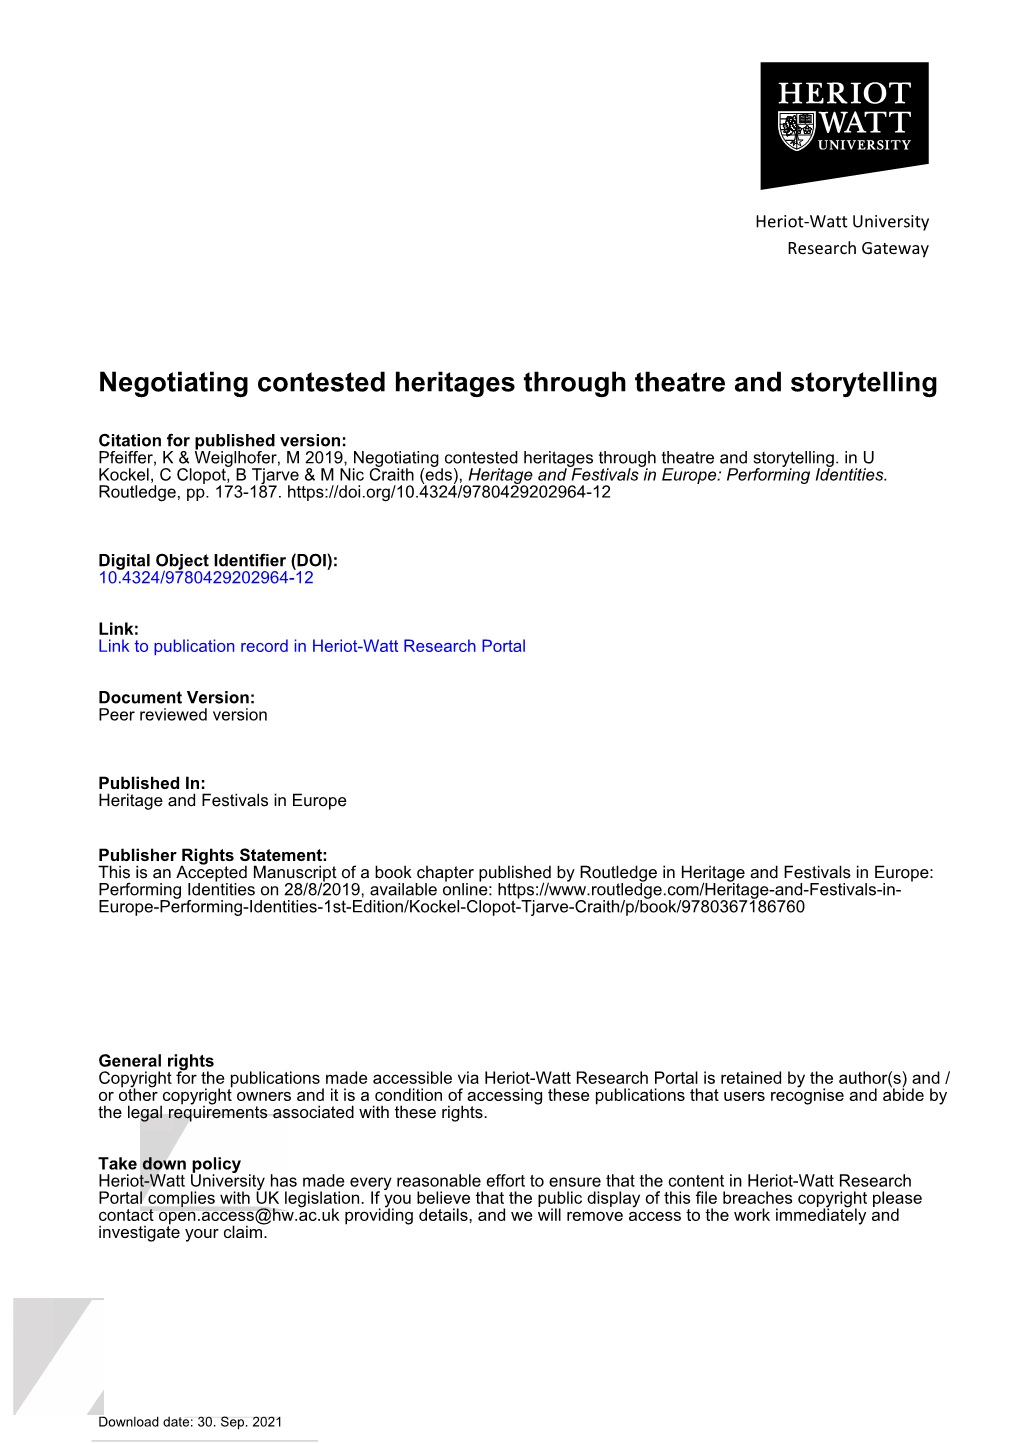 Negotiating Contested Heritages Through Theatre and Storytelling